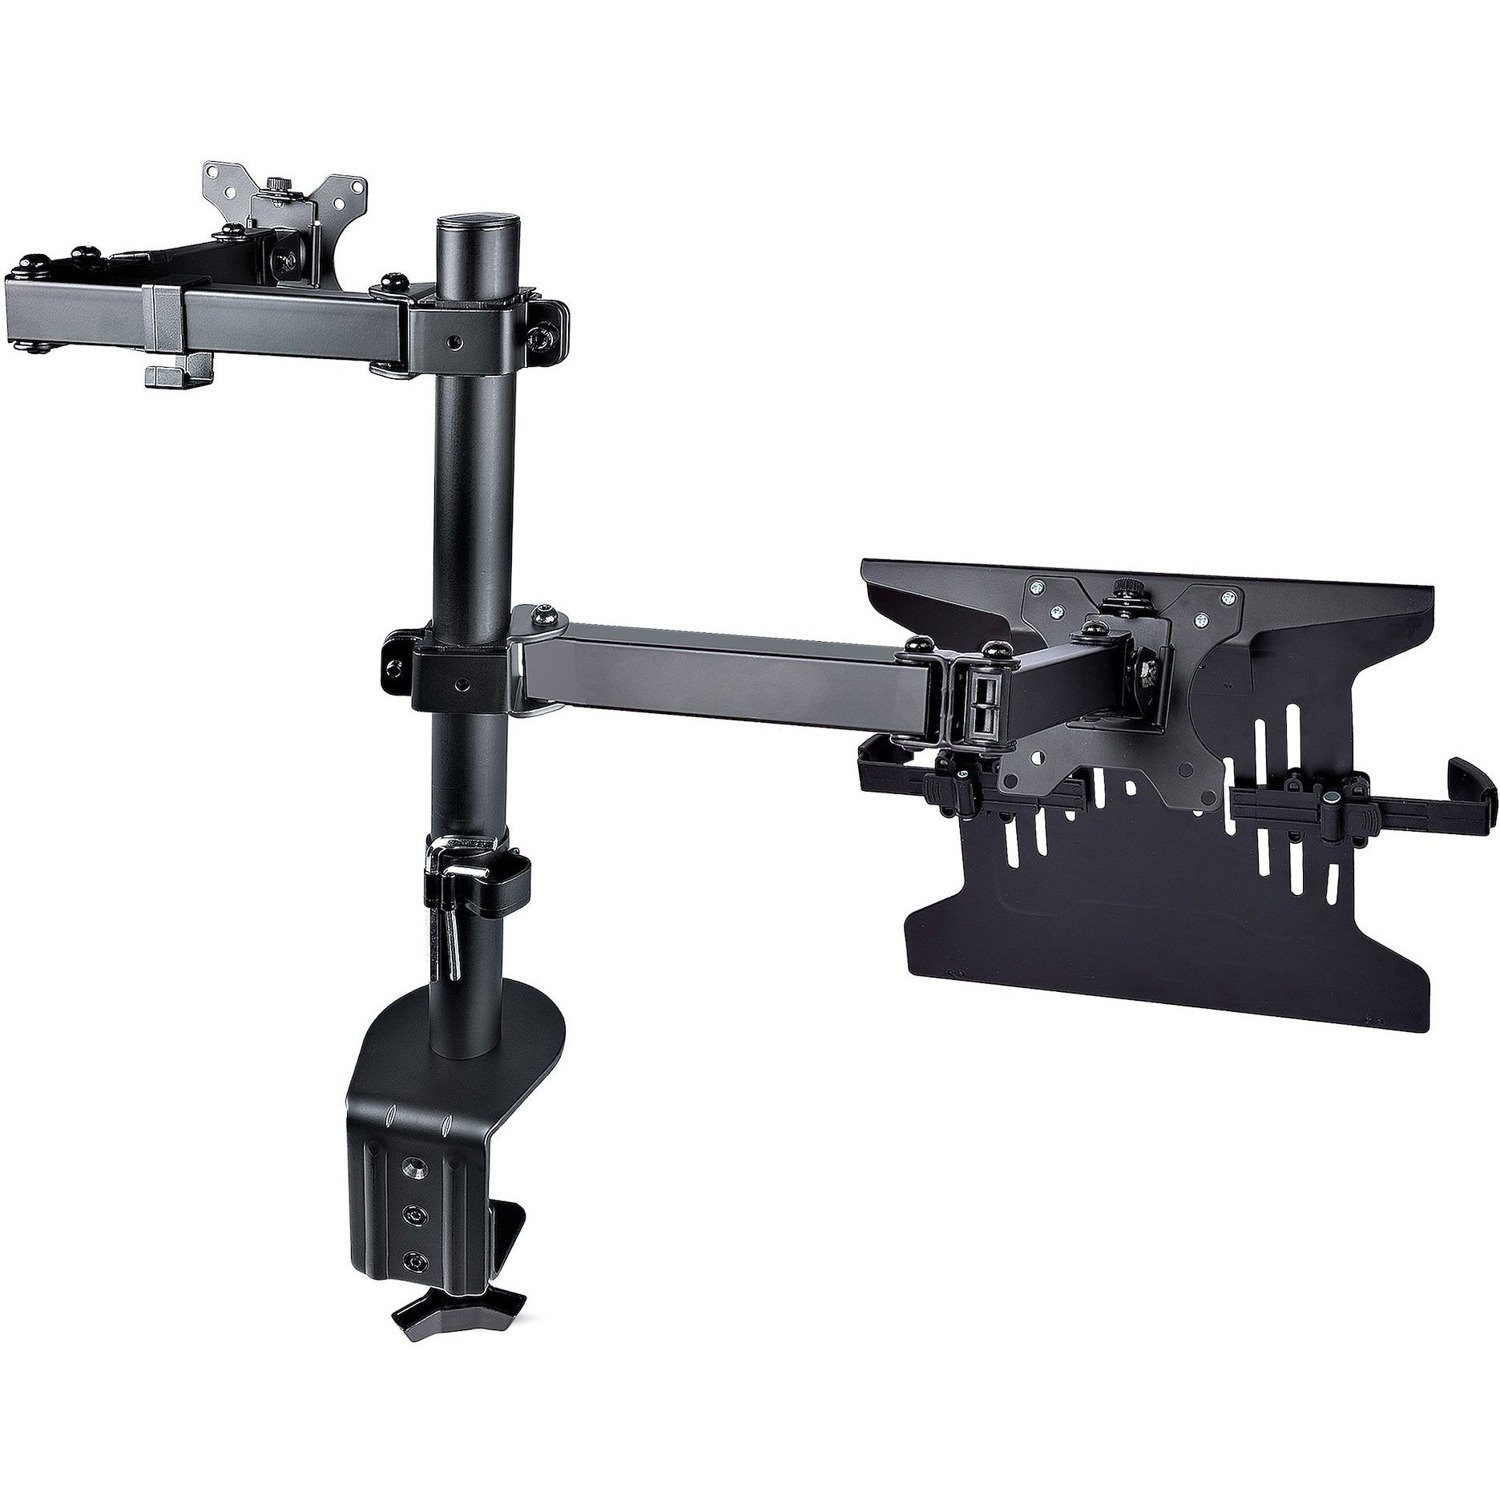 StarTech.com Monitor Arm with VESA Laptop Tray, For a Laptop & Single Display up to 32" , Adjustable Desk Laptop Arm Mount, C-clamp/Grommet